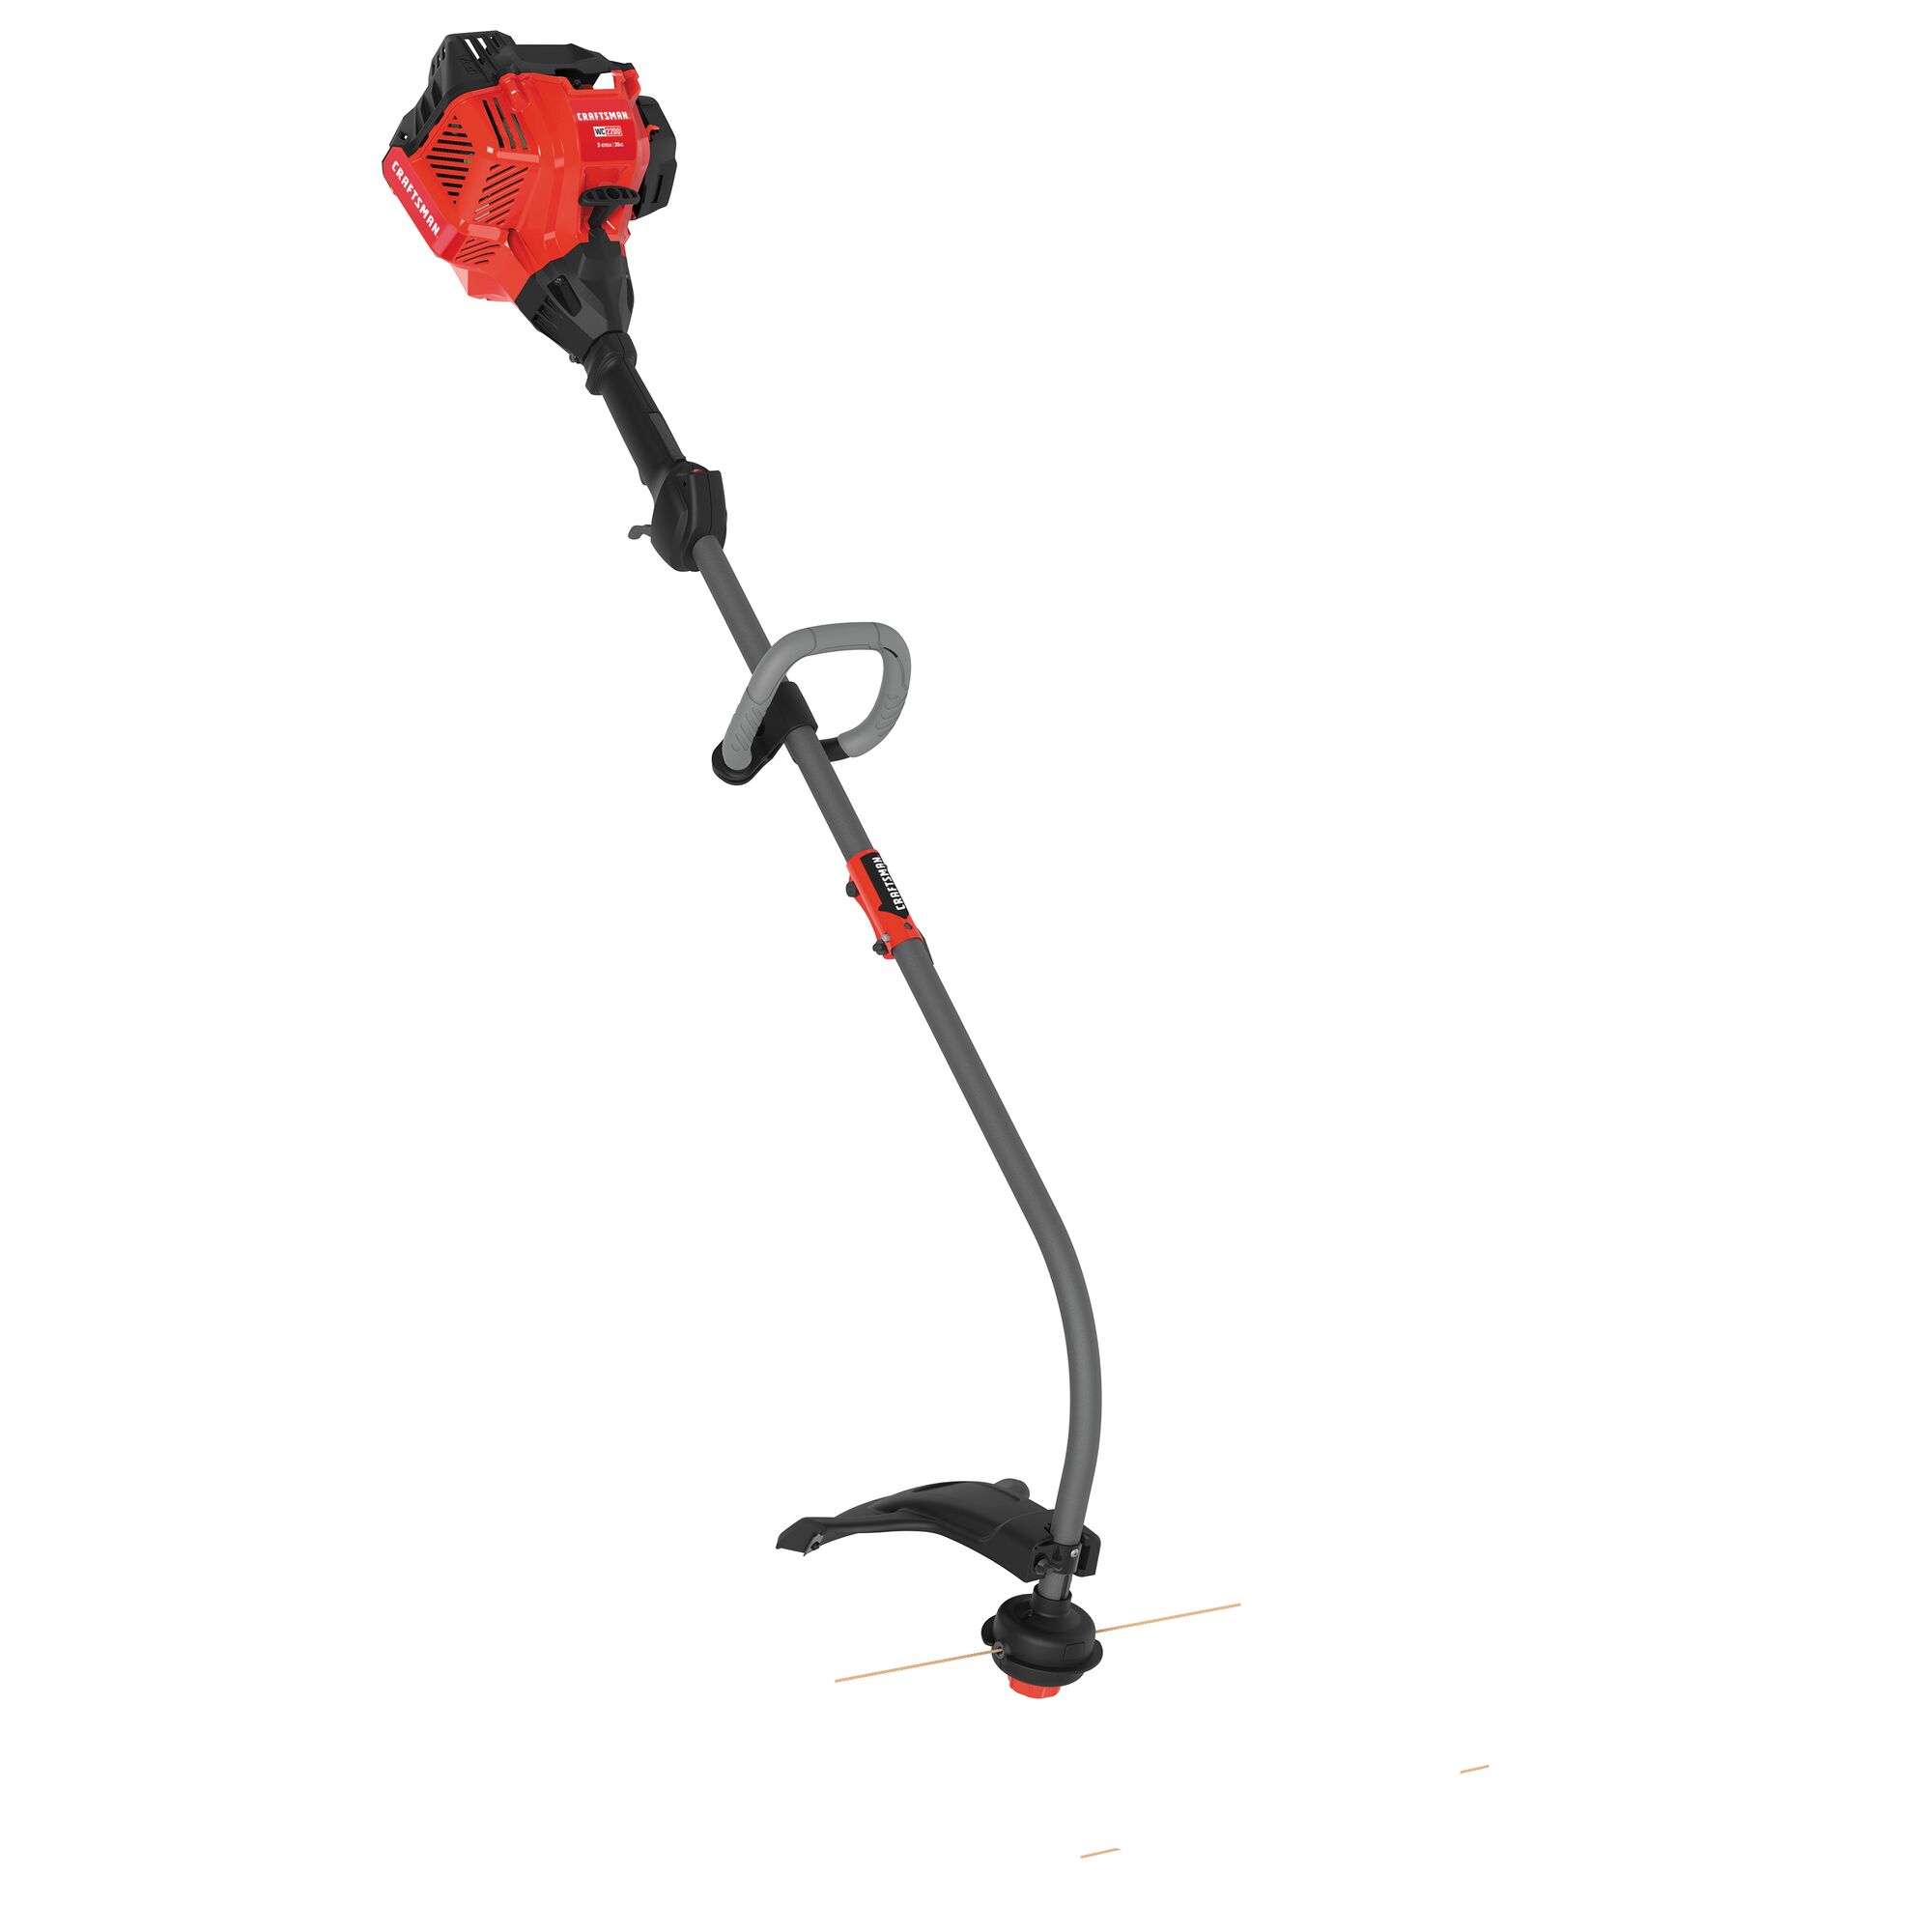 Left profile of W C 2200 weedwacker 25 C C 2 cycle 17 inch attachment capable curved shaft gas trimmer.